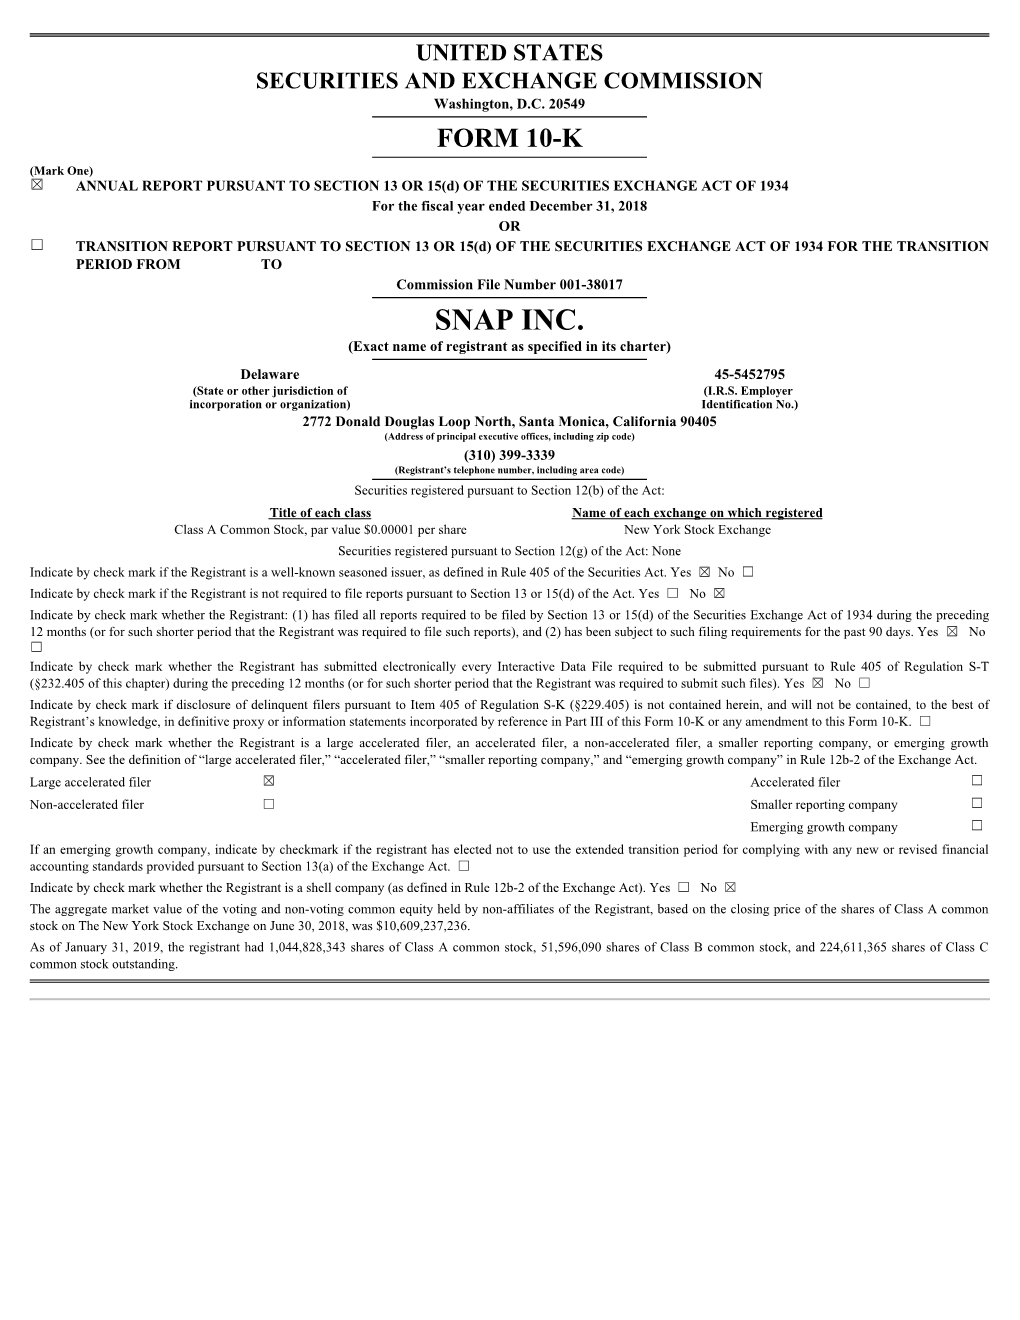 SNAP INC. (Exact Name of Registrant As Specified in Its Charter)